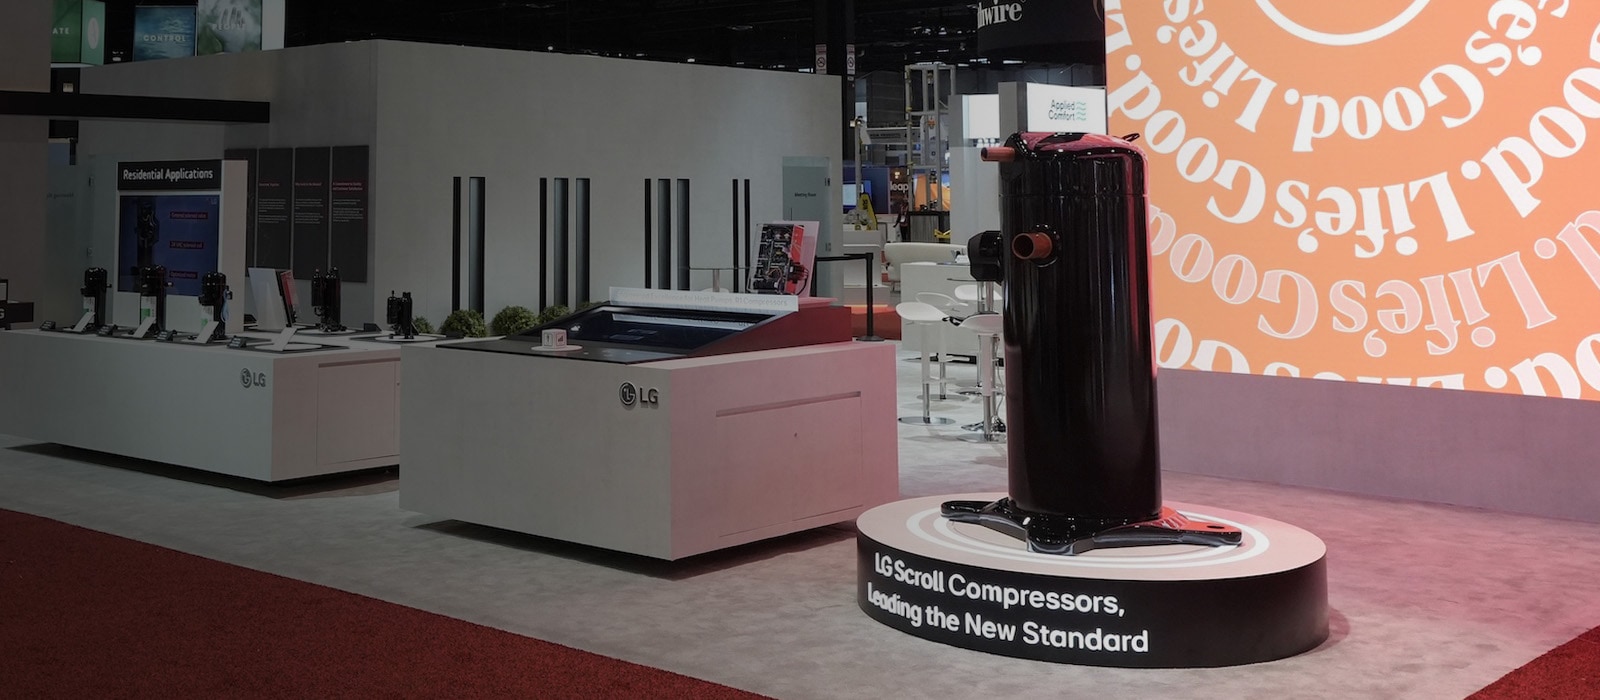 An image of the booth space for LG Compressors and Motors at the AHR Expo 2024